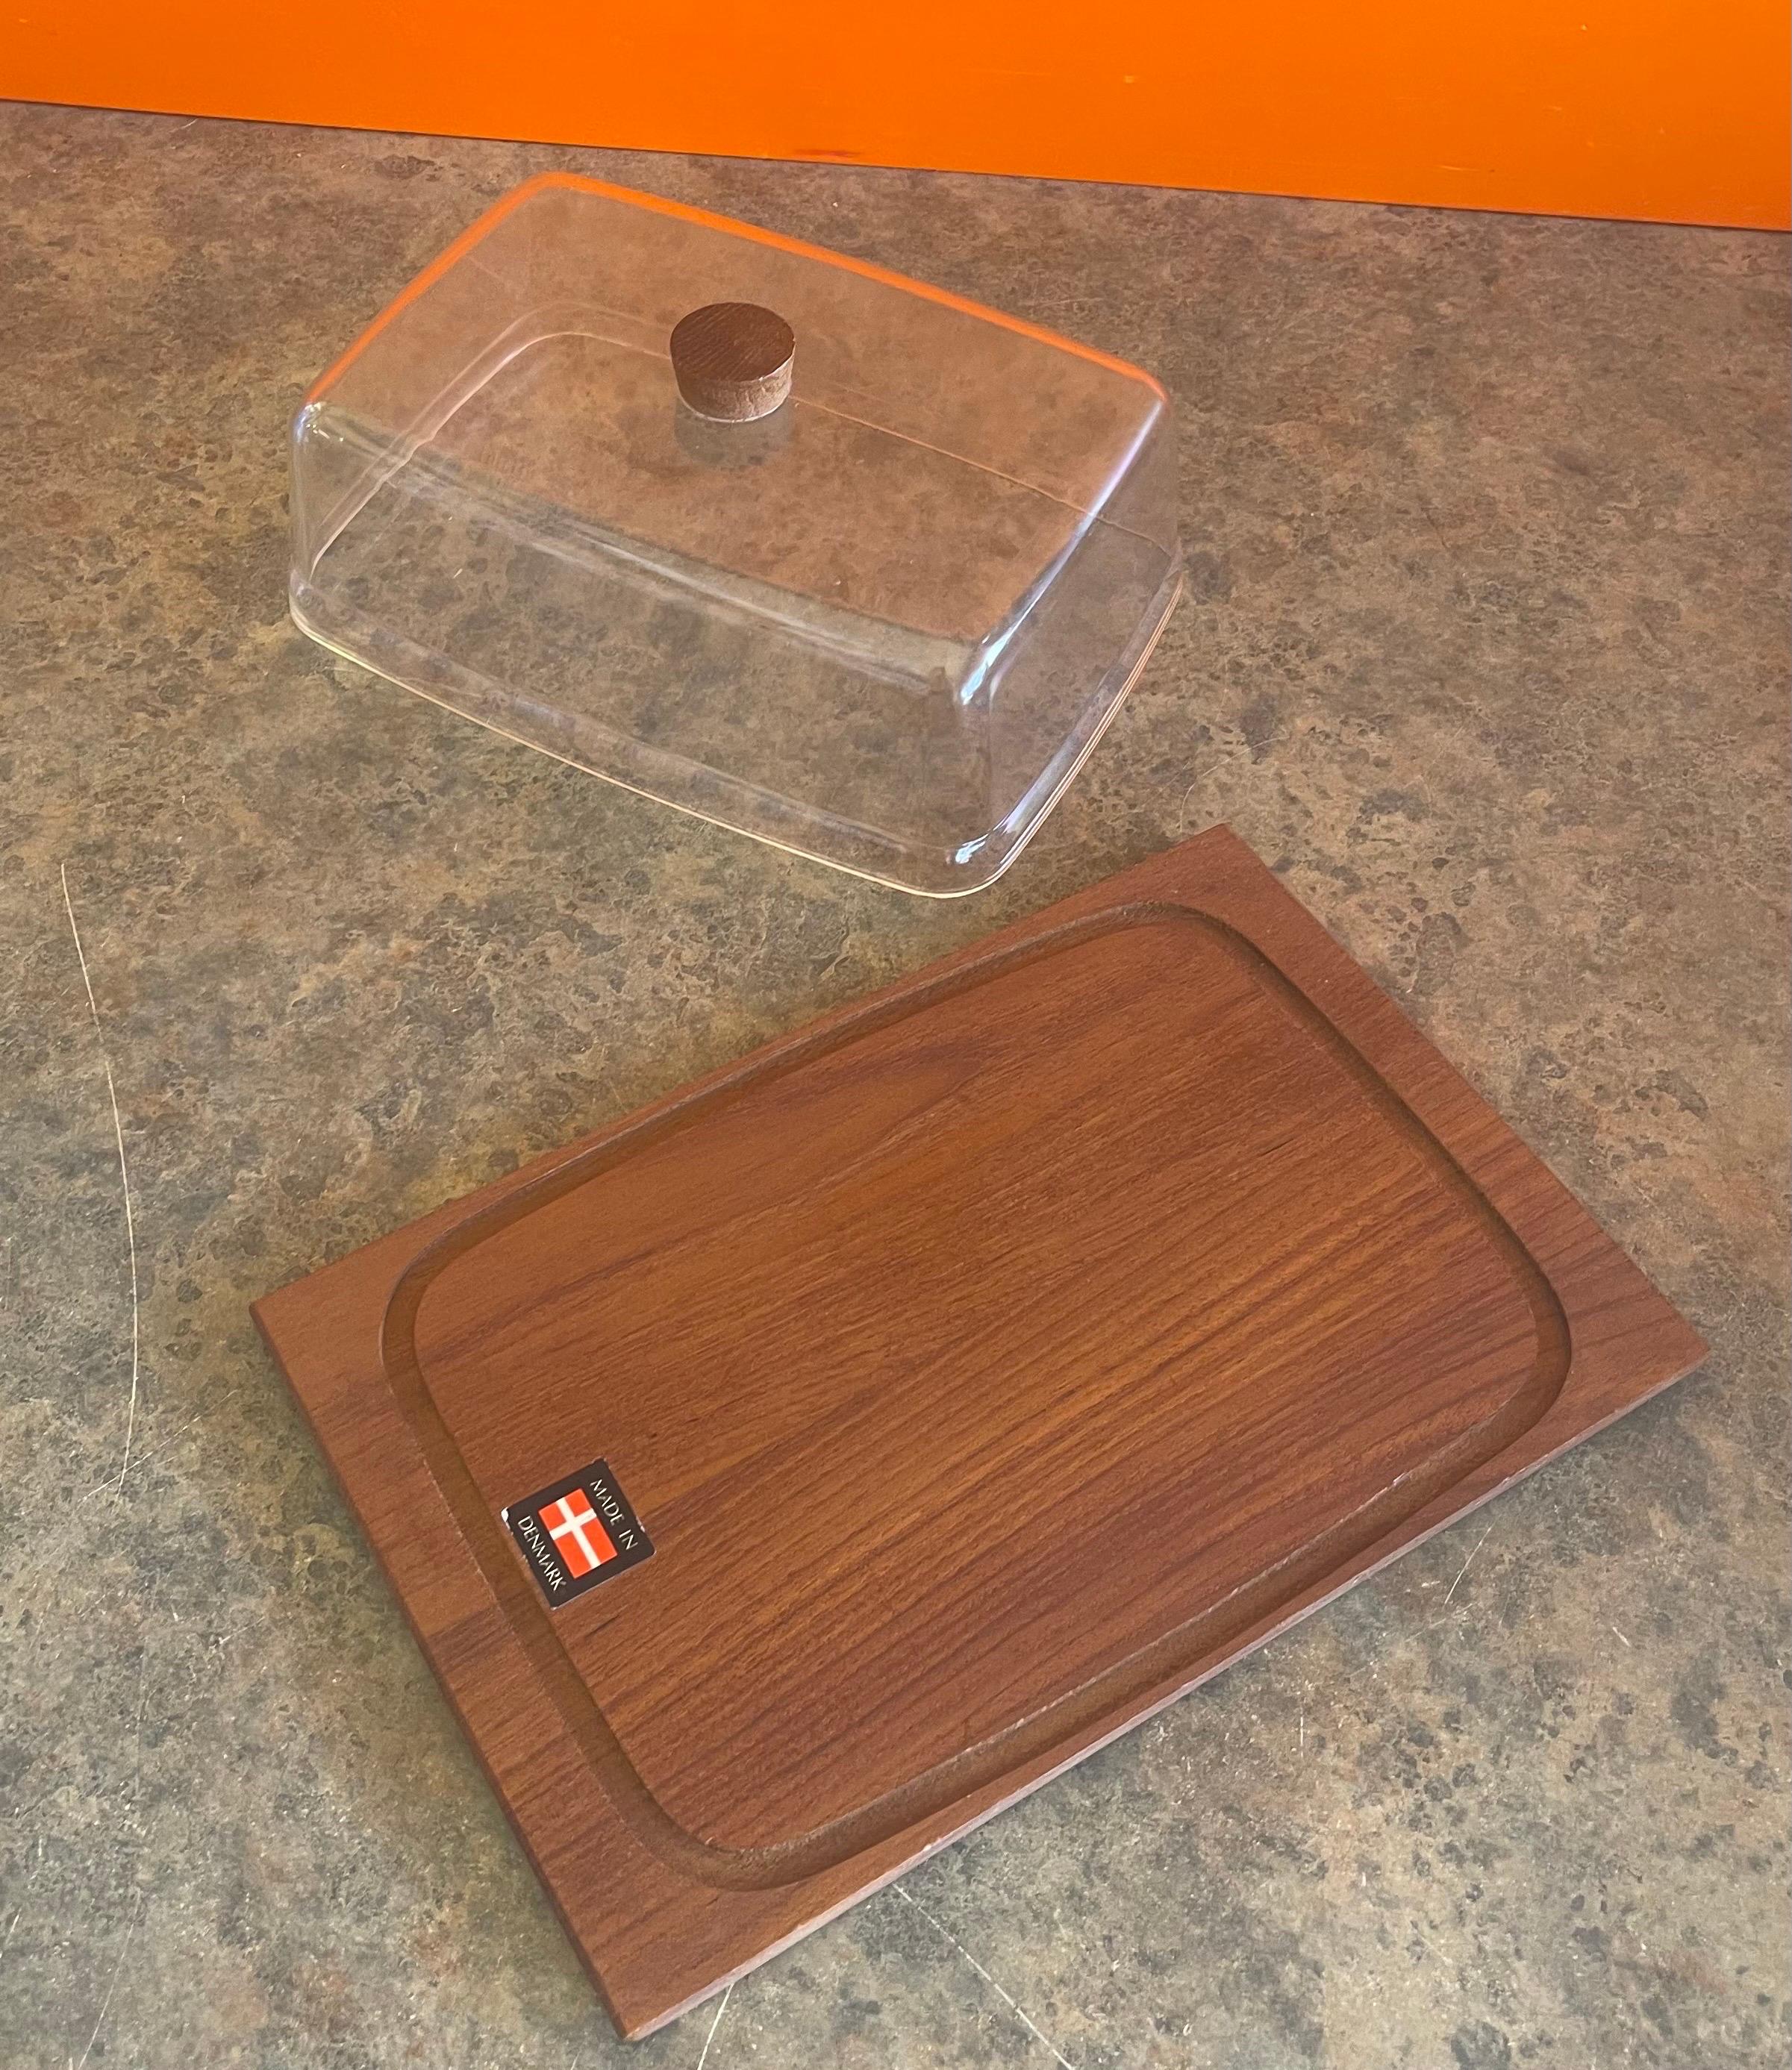 Plastic Danish Modern Teak Tray / Cheese Board with Dome Lid.ivnl__ For Sale